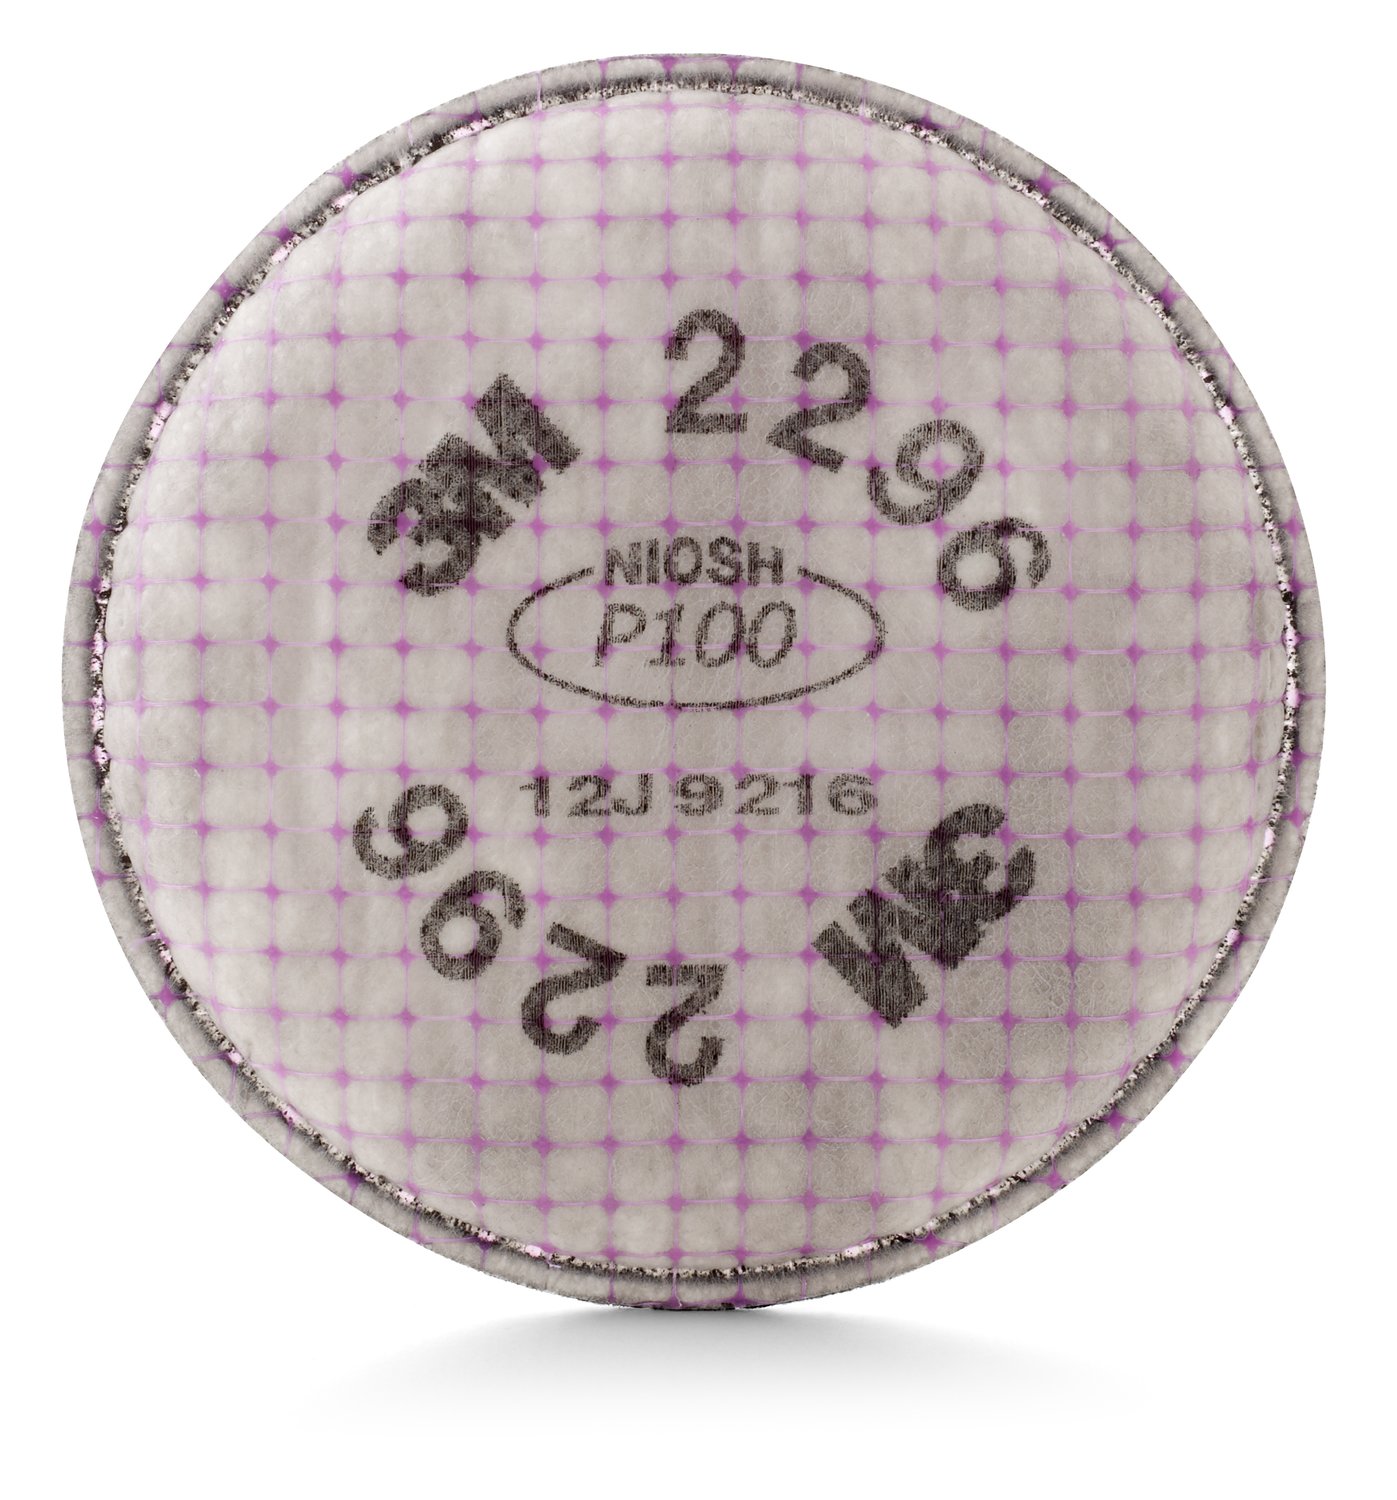 7000127450 - 3M Advanced Particulate Filter 2296, P100, with Nuisance Level Acid Gas
Relief 100 EA/Case